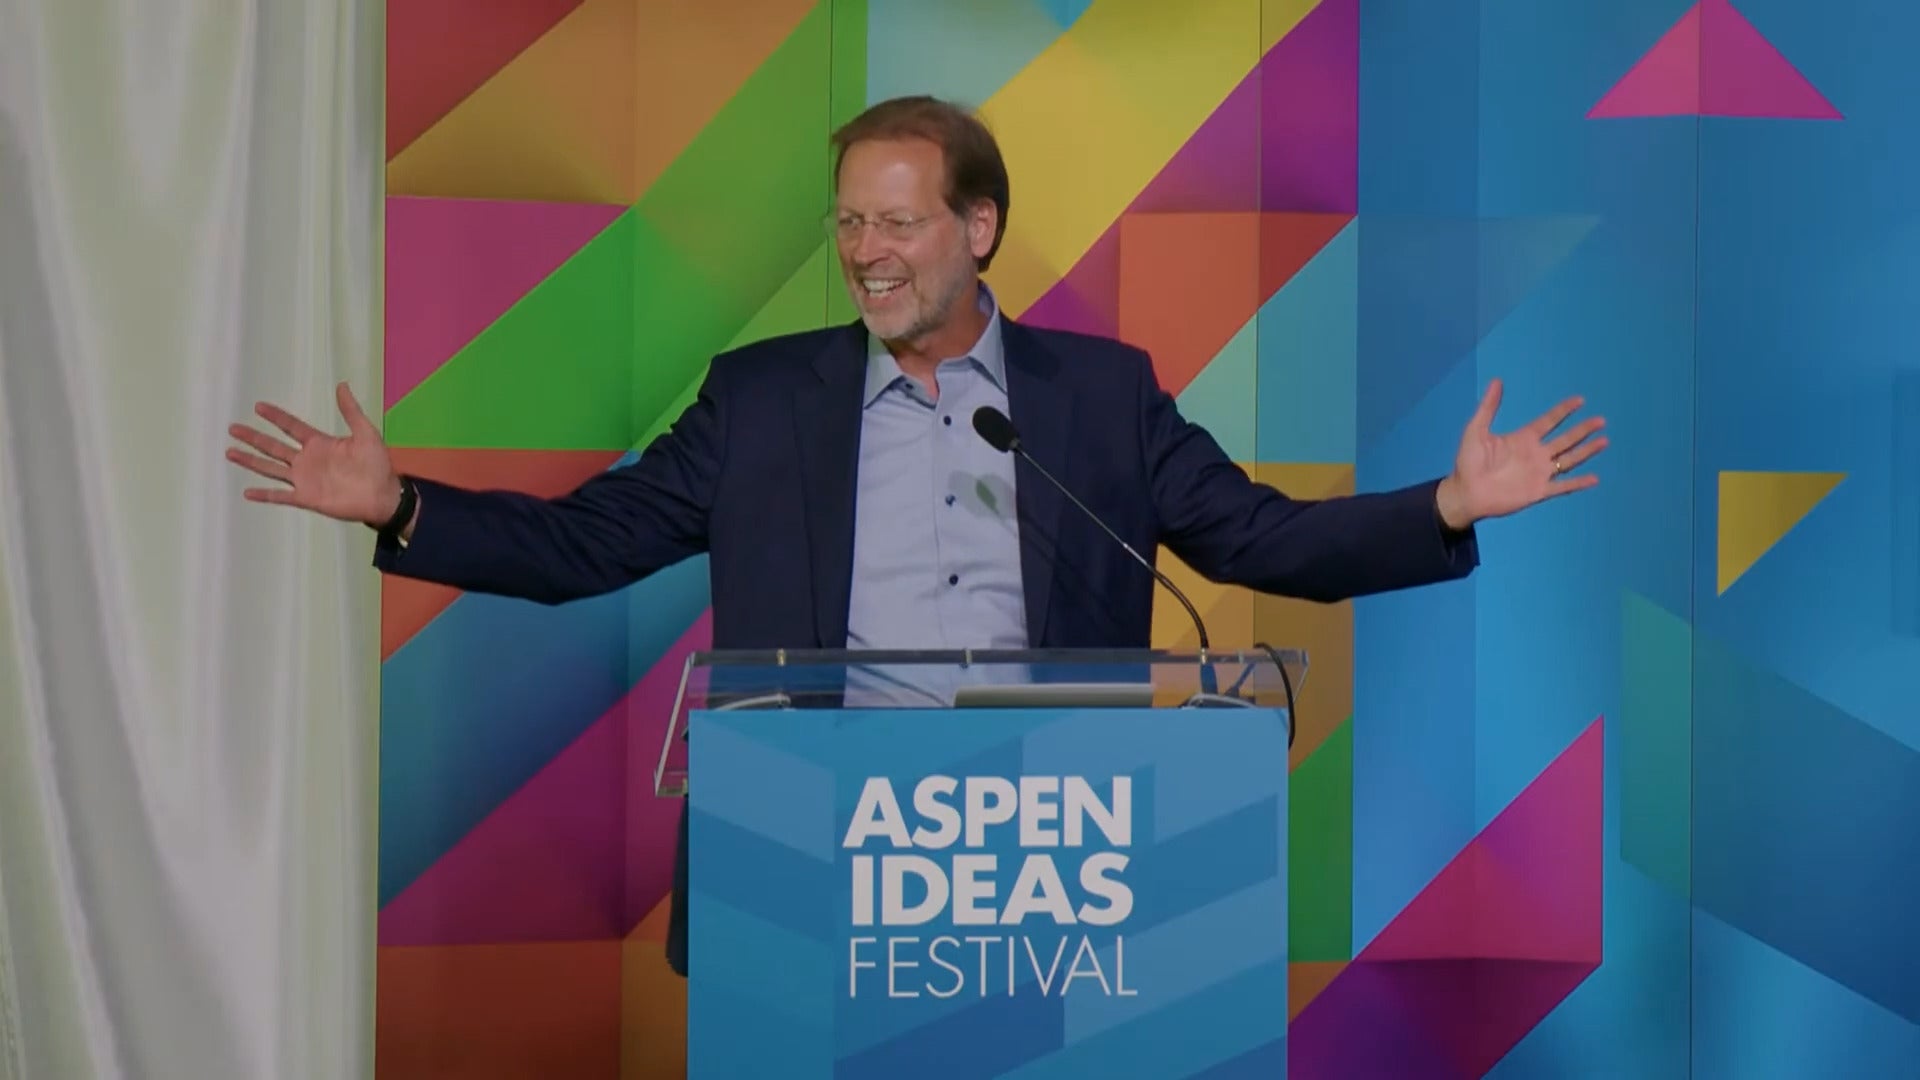 Aspen Ideas Festival Opening and Welcome